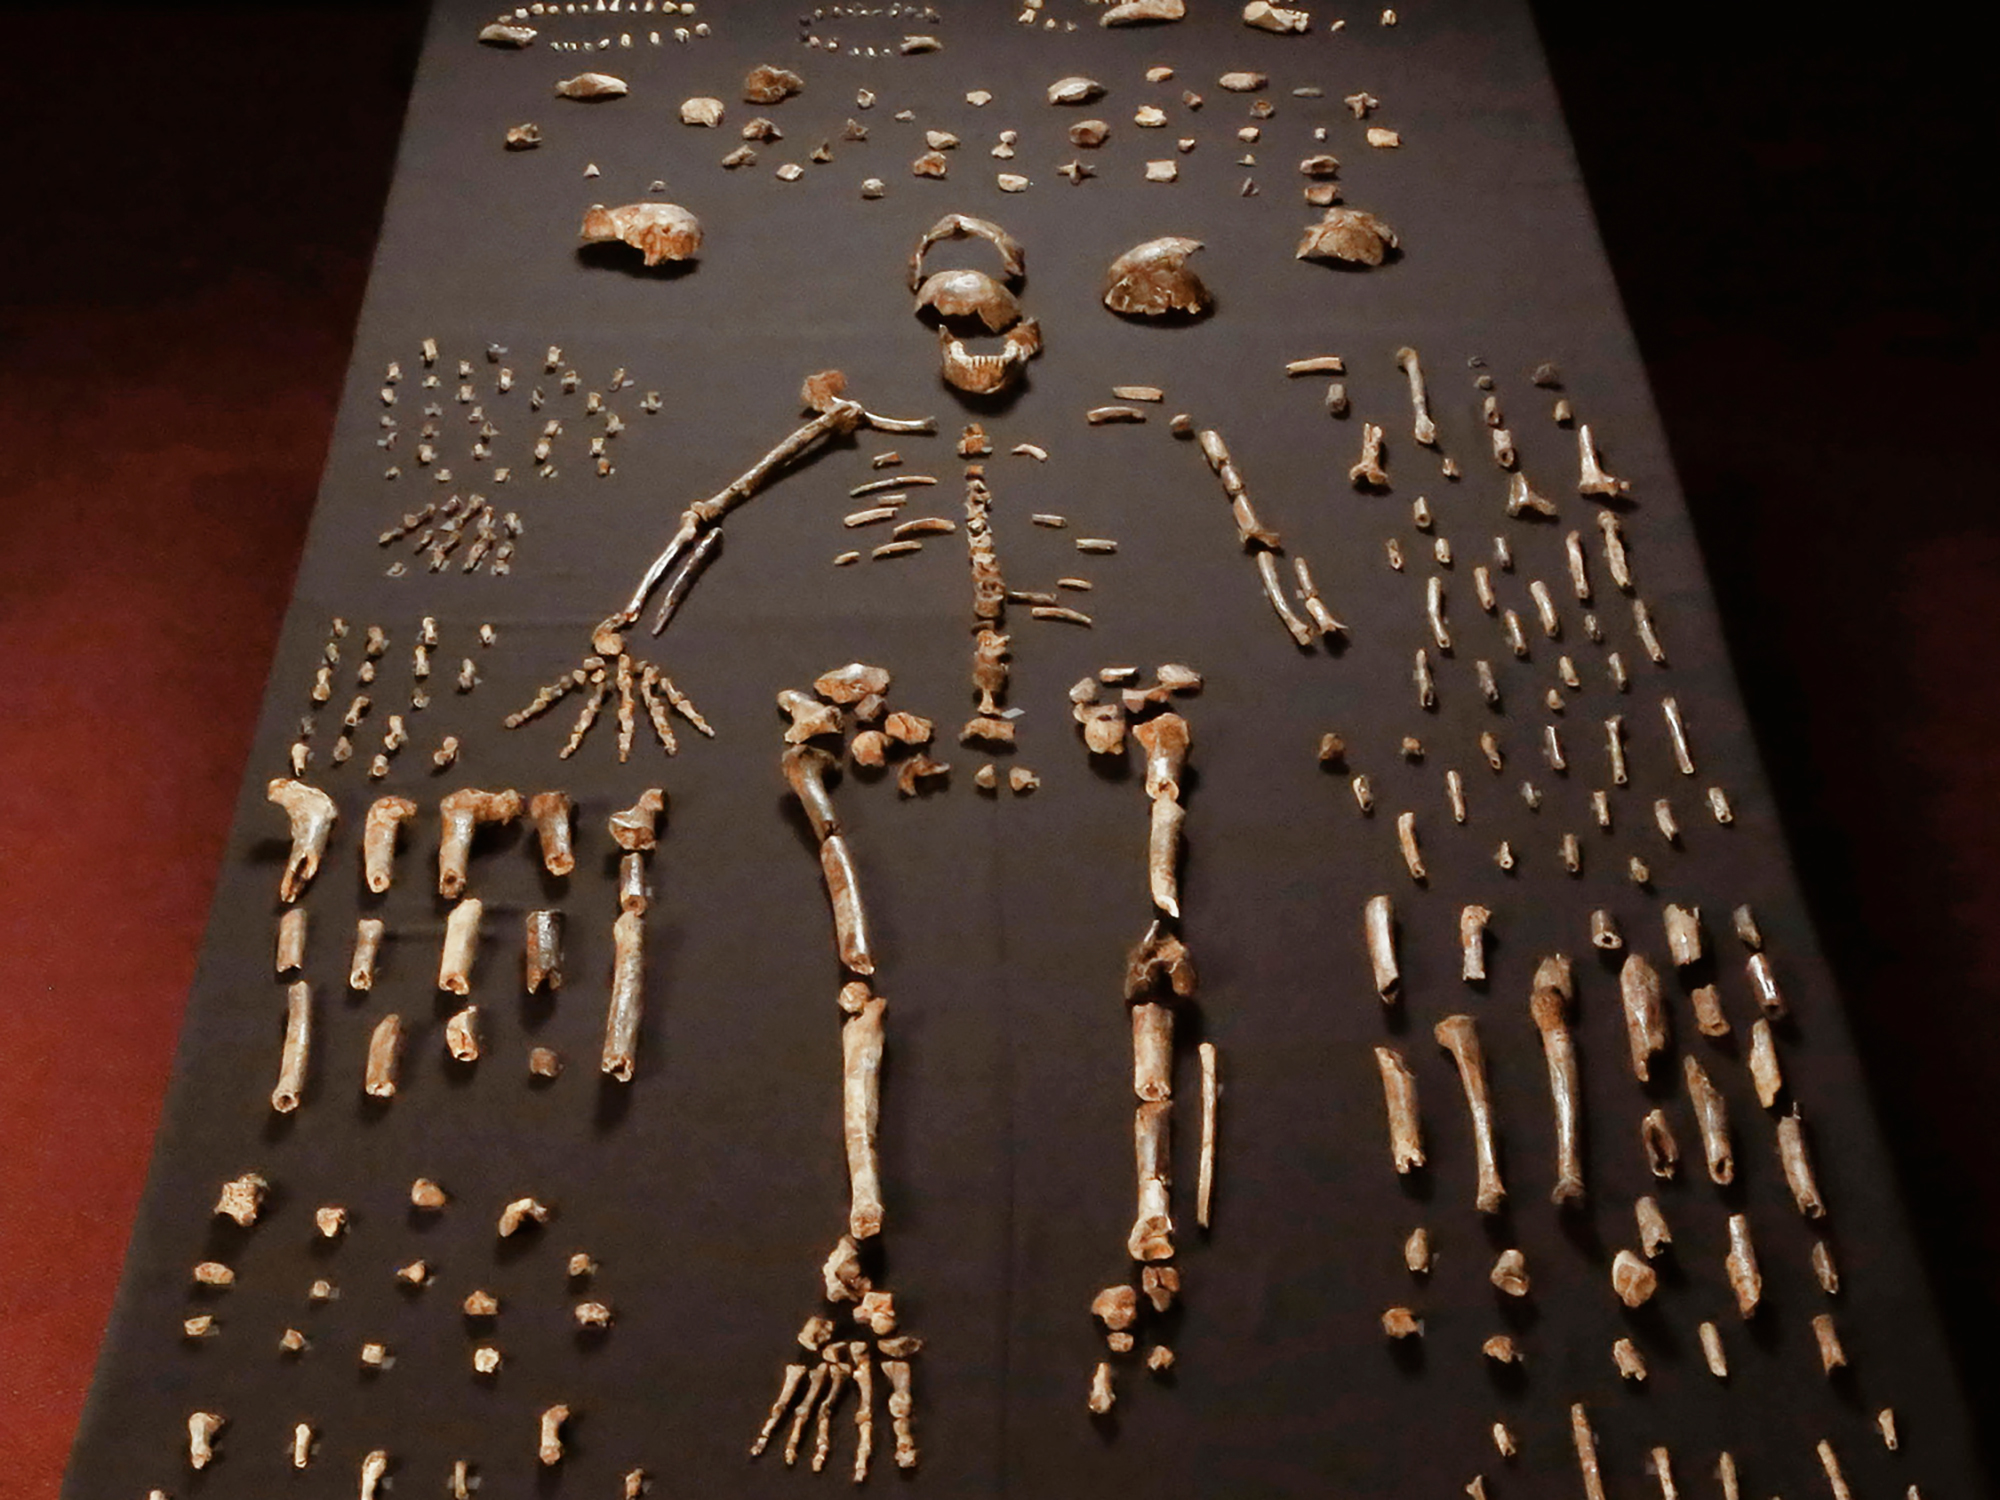 The 737 known elements of Homo naledi